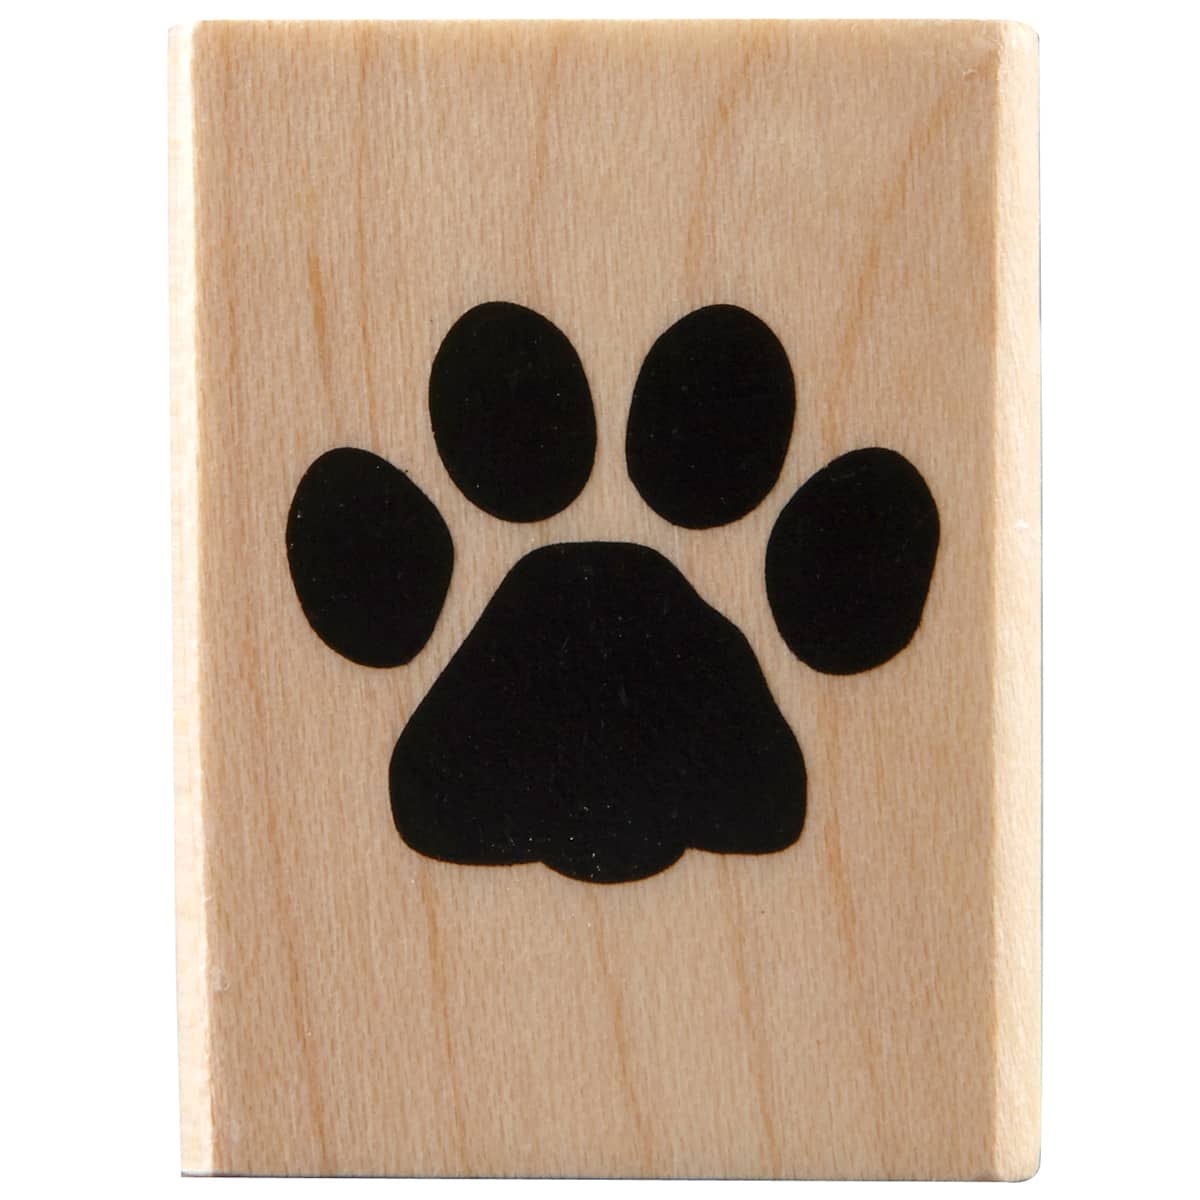 Teeny Tiny paw prints rubber stamp B7110 Wood Mounted 